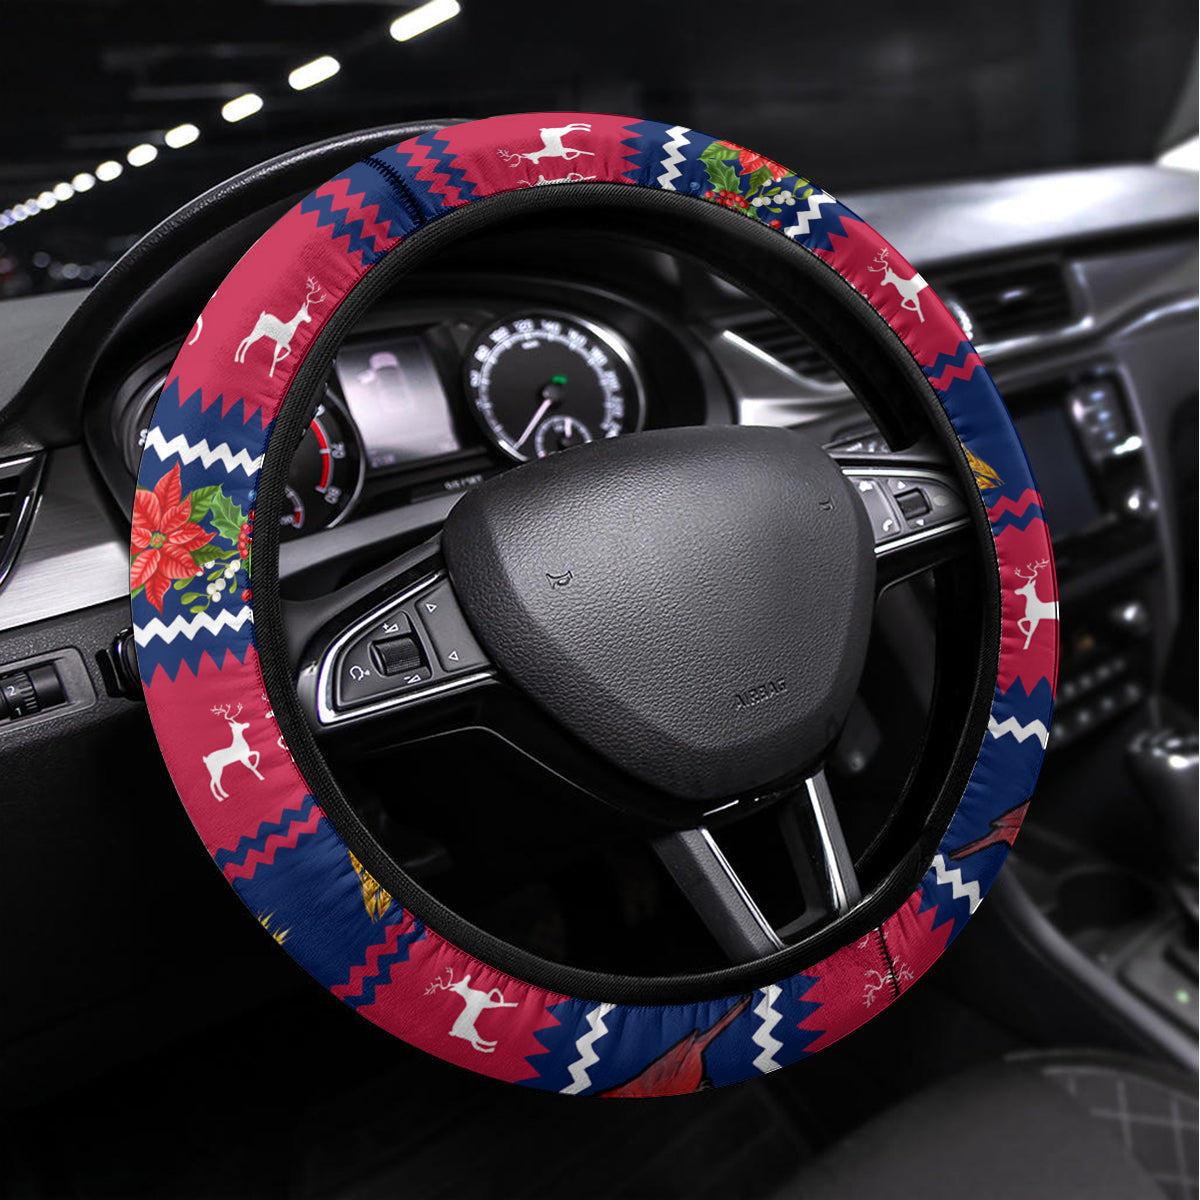 Ohio Christmas Steering Wheel Cover Santa Claus Pattern Unique Style